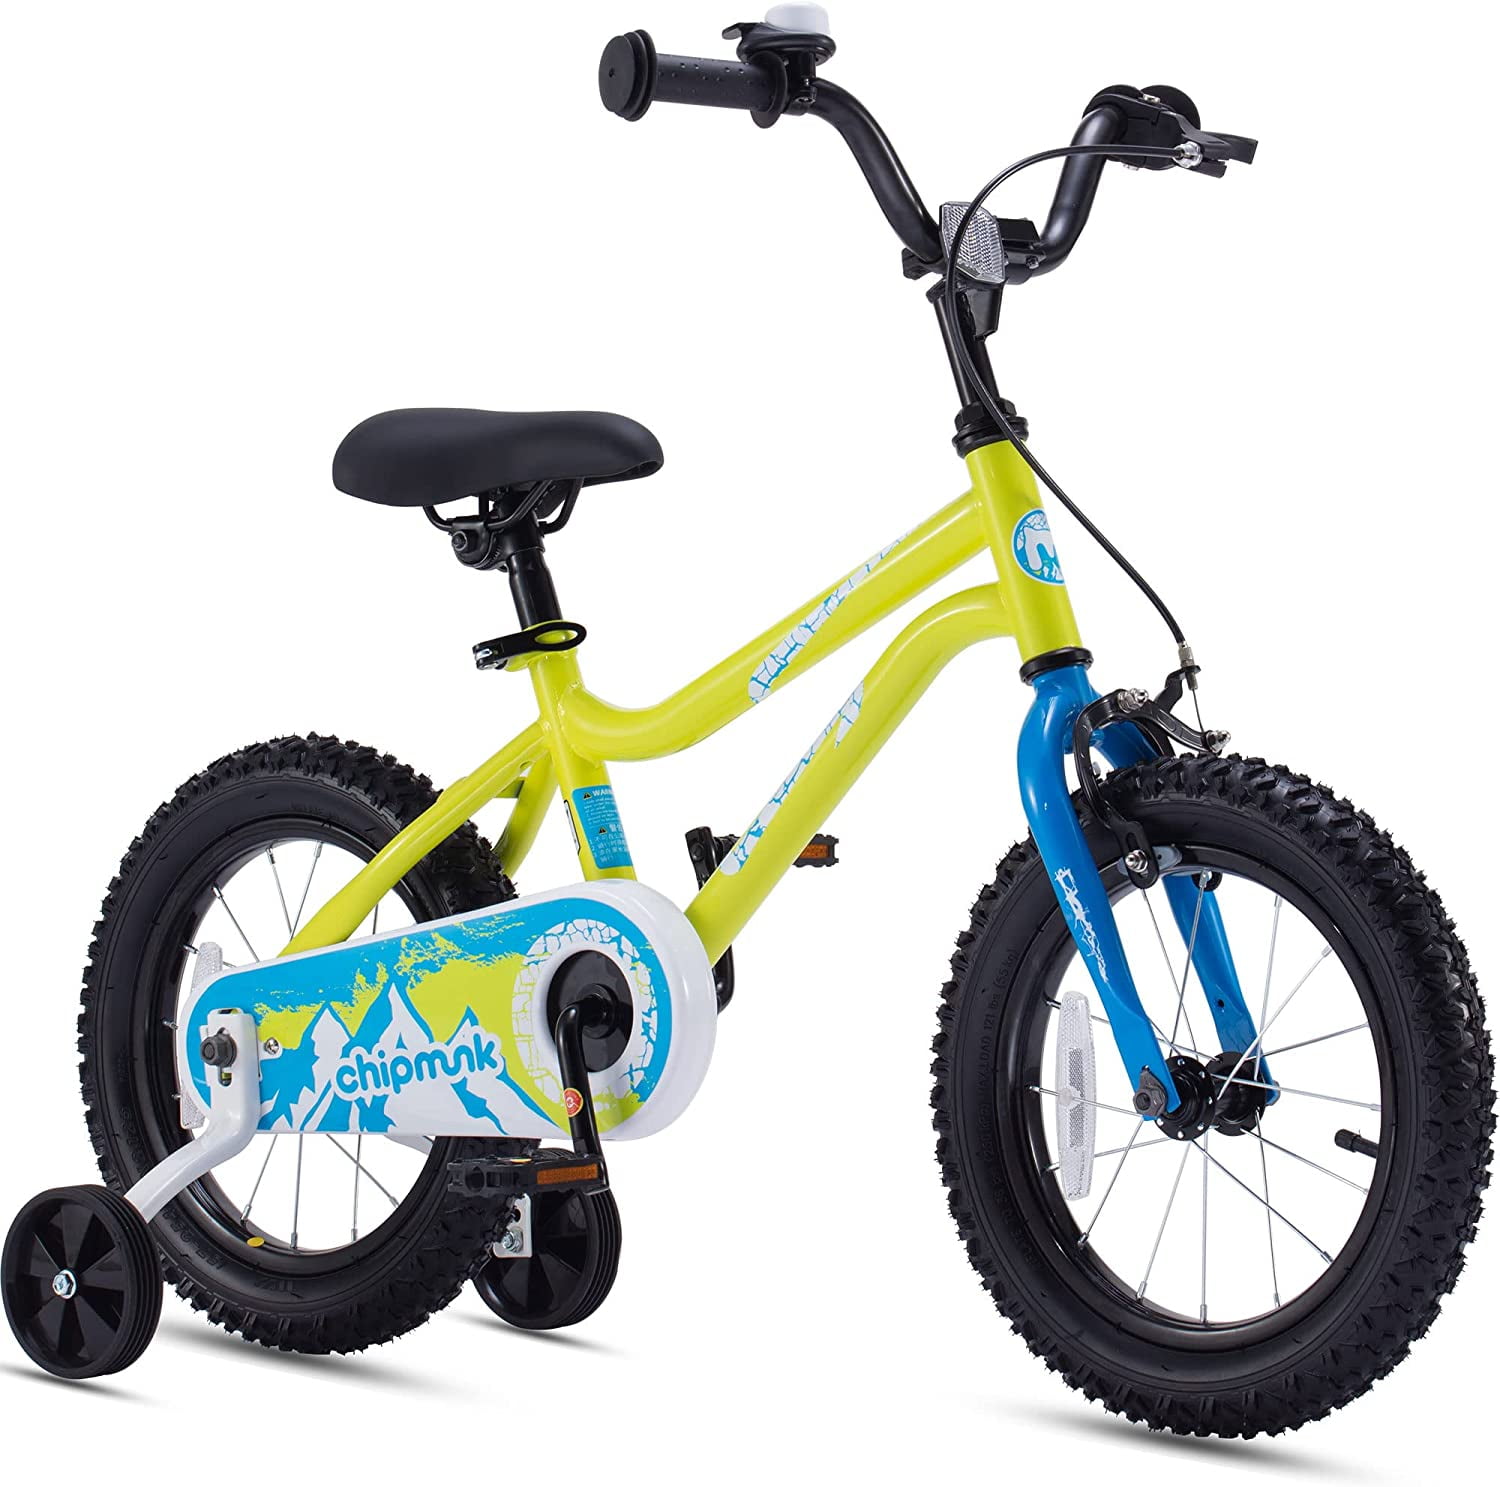 HZJC Training Wheels for Childrens Bicycle stabiliser for 14 16 18 20 inch Bike 